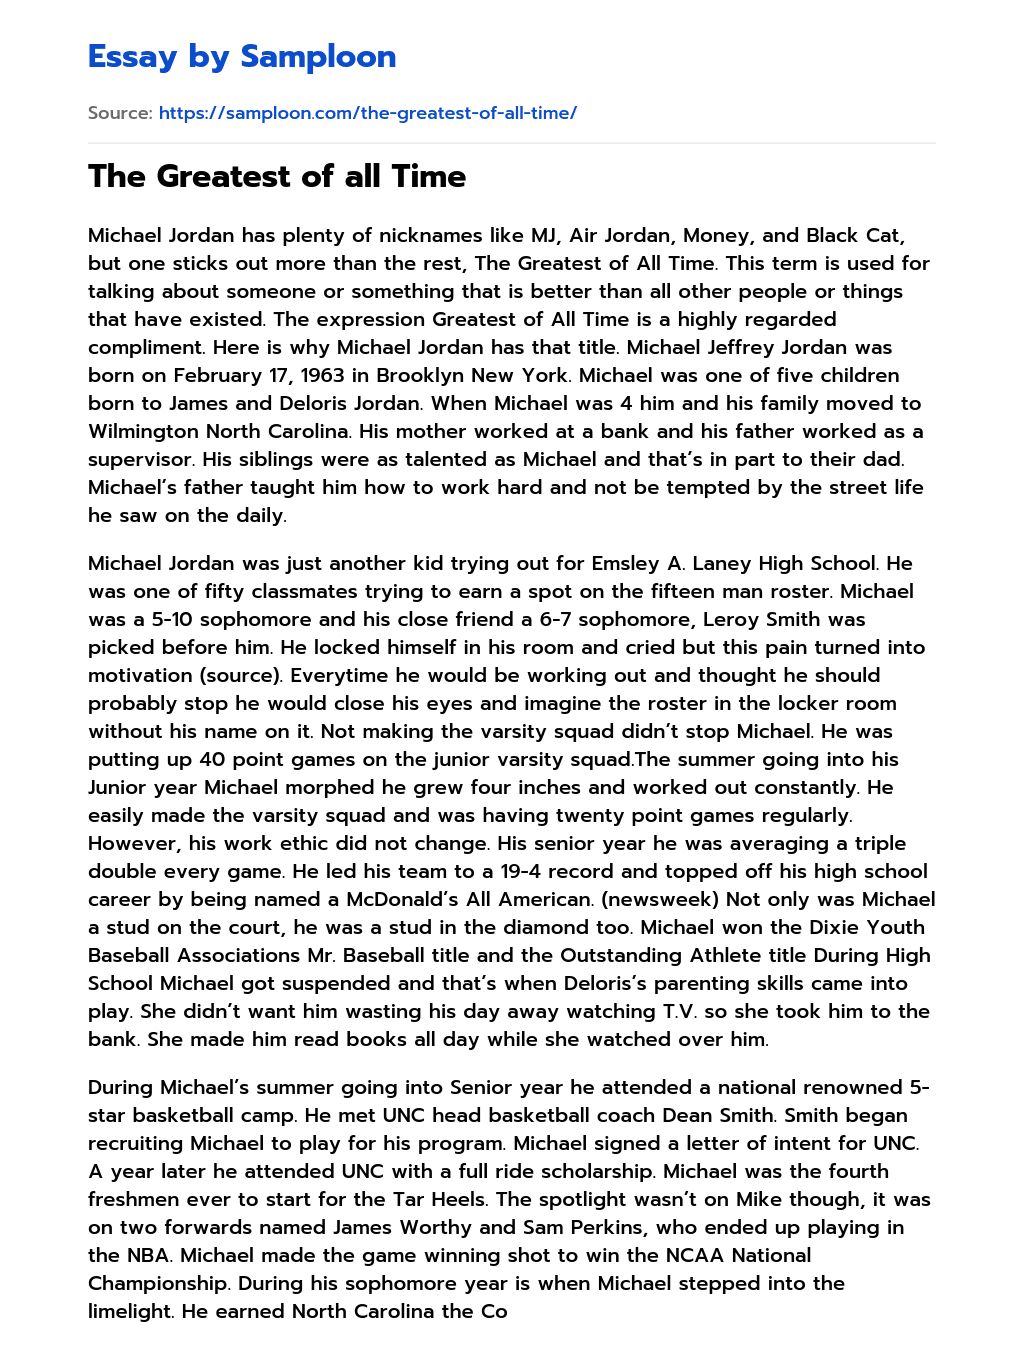 The Greatest of all Time essay